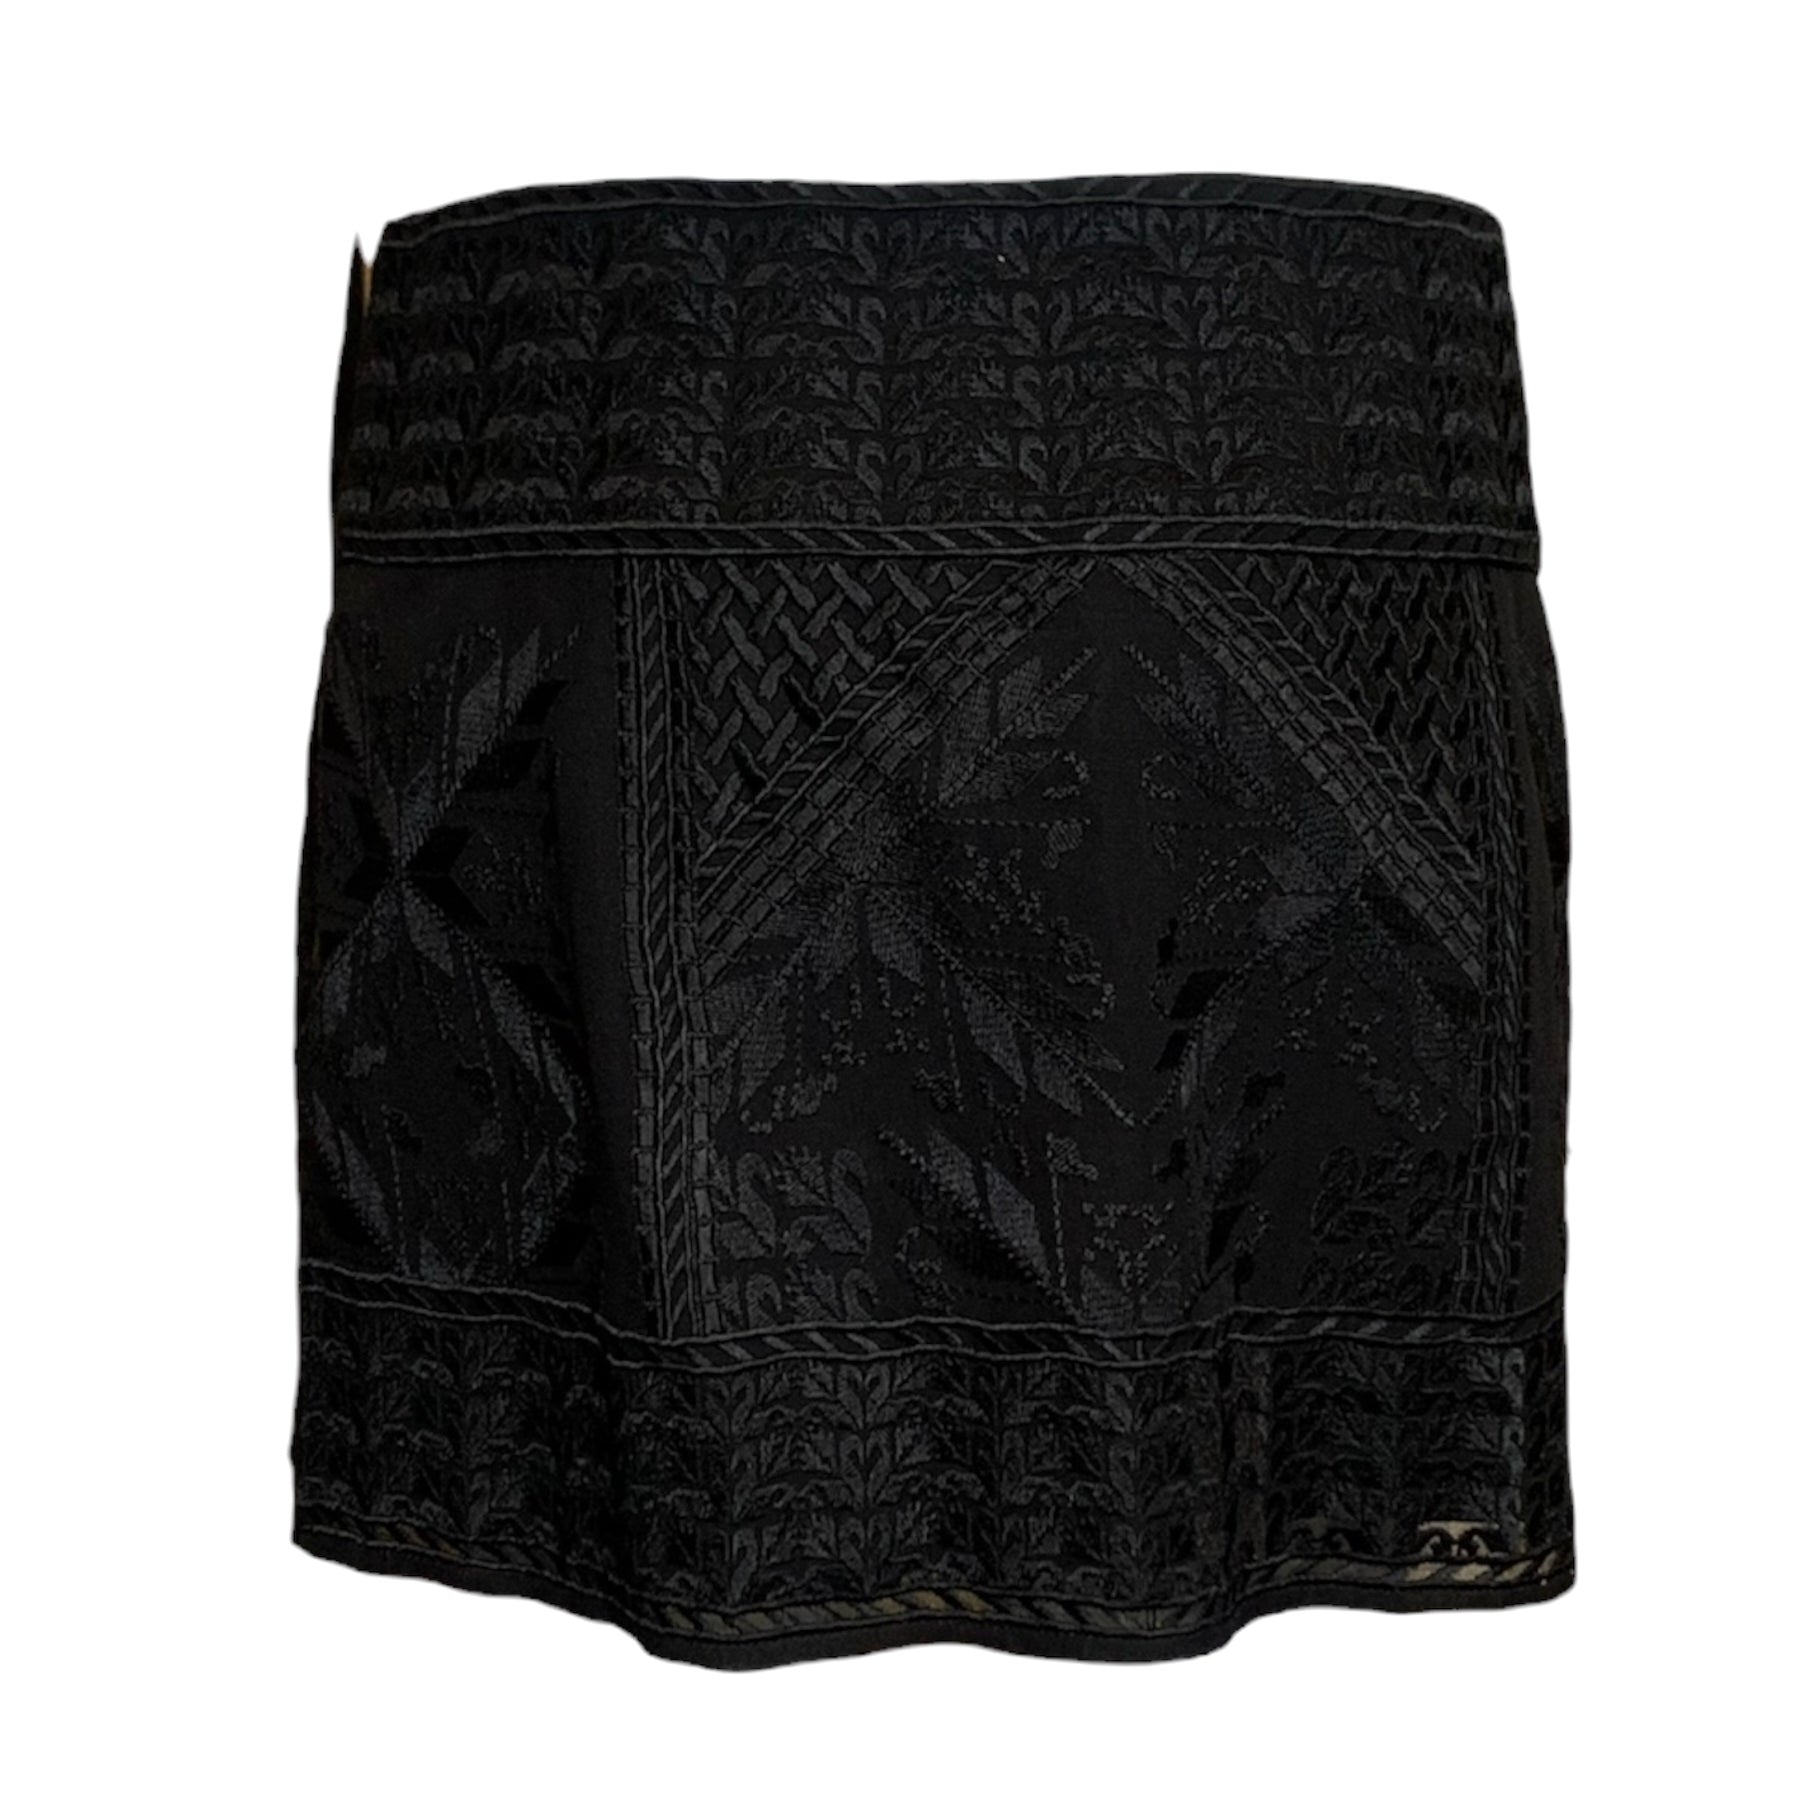 Isabel Marant Black Wrap Mini Skirt with Indian Embroidery, back